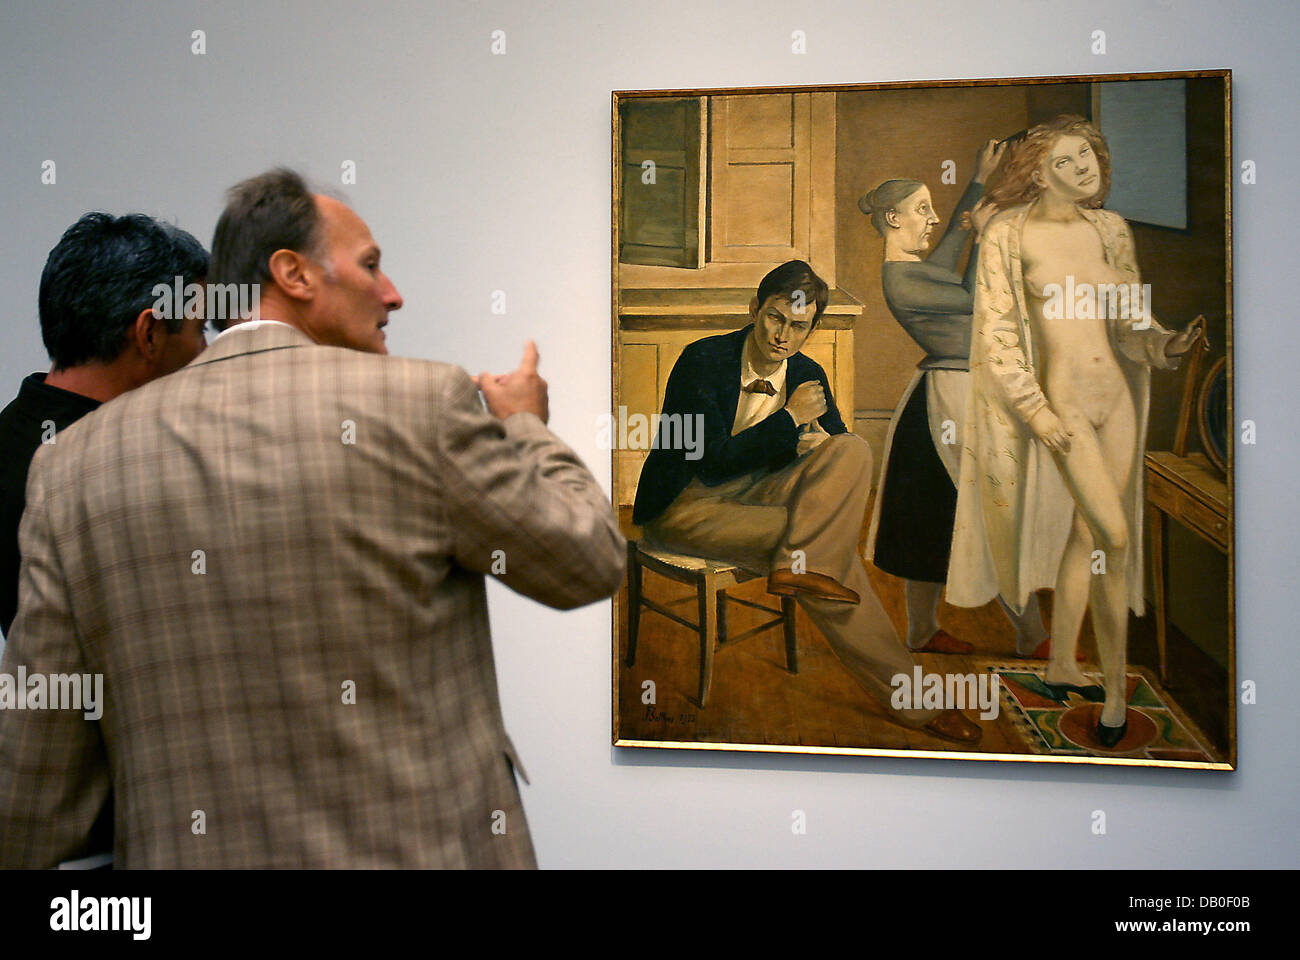 Visitors observe the 1933-painting 'Cathy's Toilette' by Balthus (Balthasar  Klossowski, 1908-2001) at 'Museum Ludwig' in Cologne, Germany, 17 August  2007. The French artist's first solo exhibition in Germany presents about  70 significant